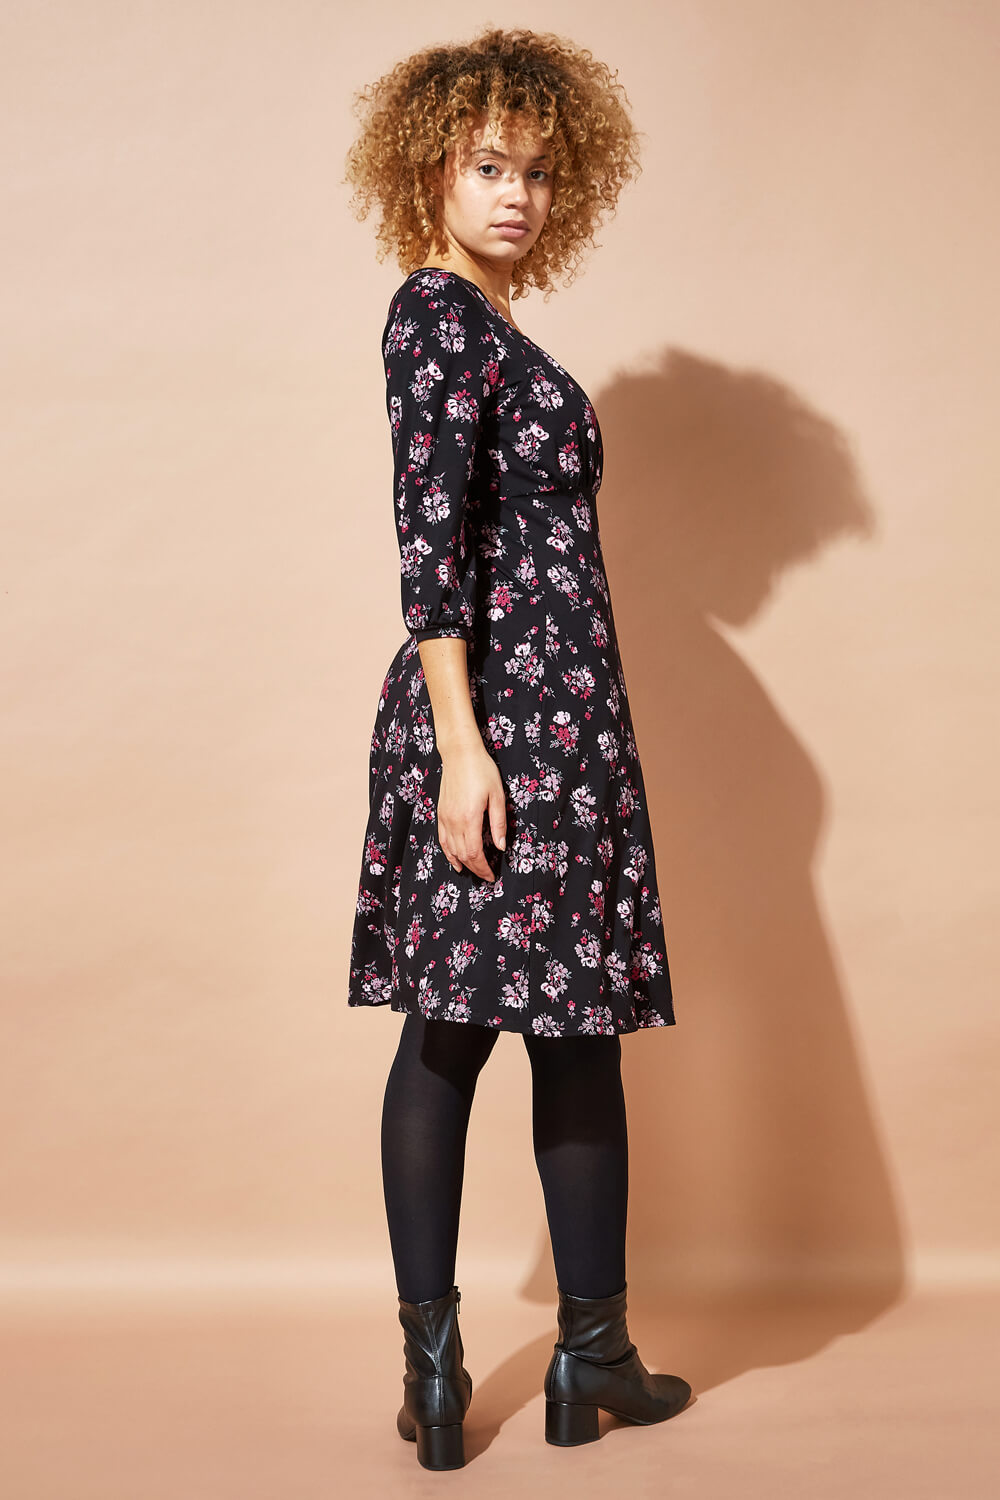 PINK Square Neck Floral Stretch Dress, Image 2 of 4